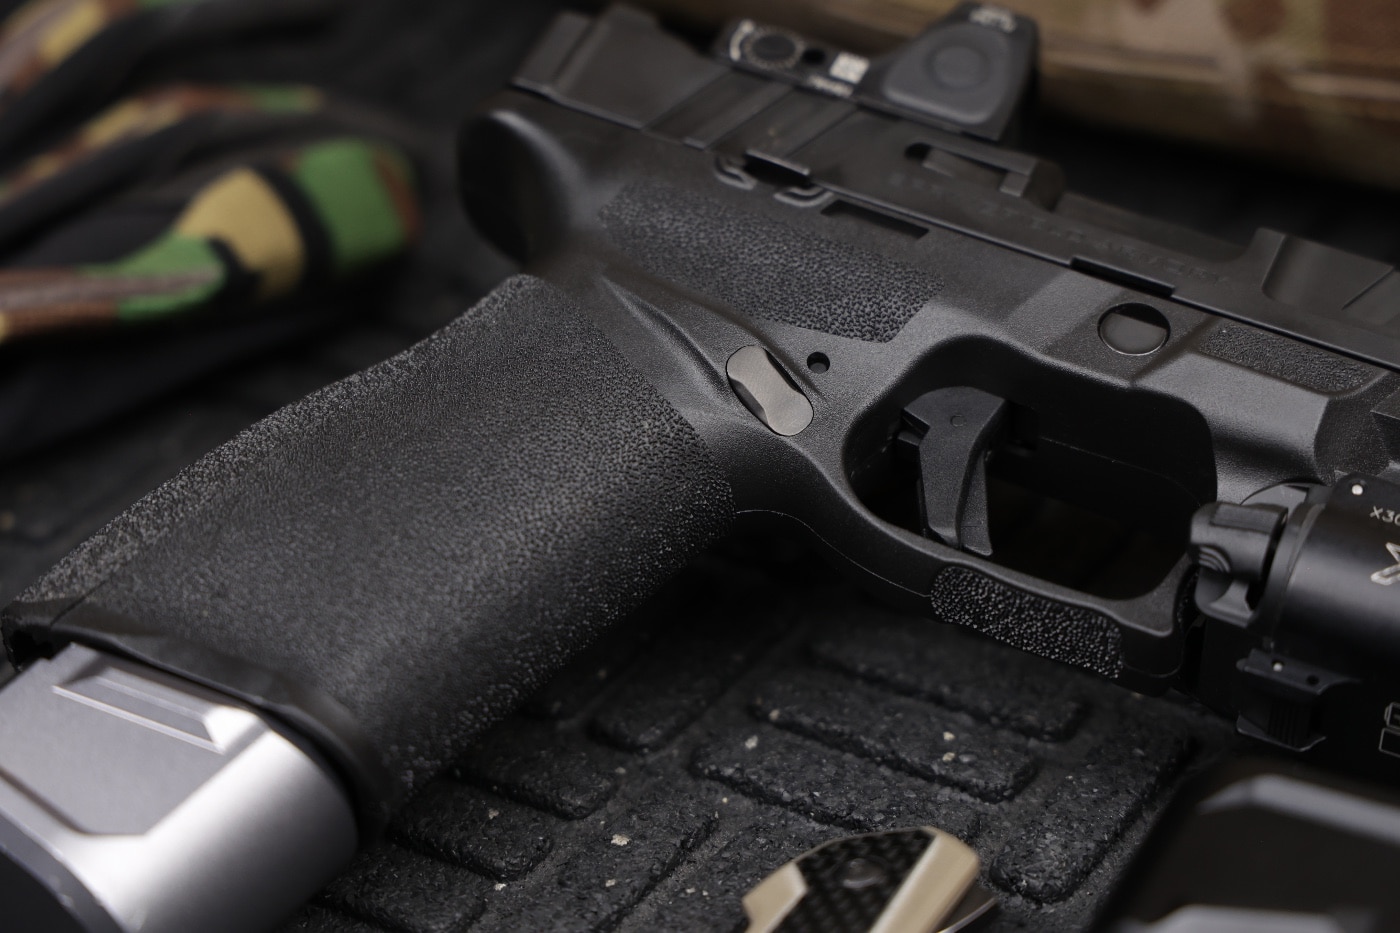 In this digital photograph, we see the Tyrant CNC magazine release for the Springfield Armory Echelon semi-automatic pistol.